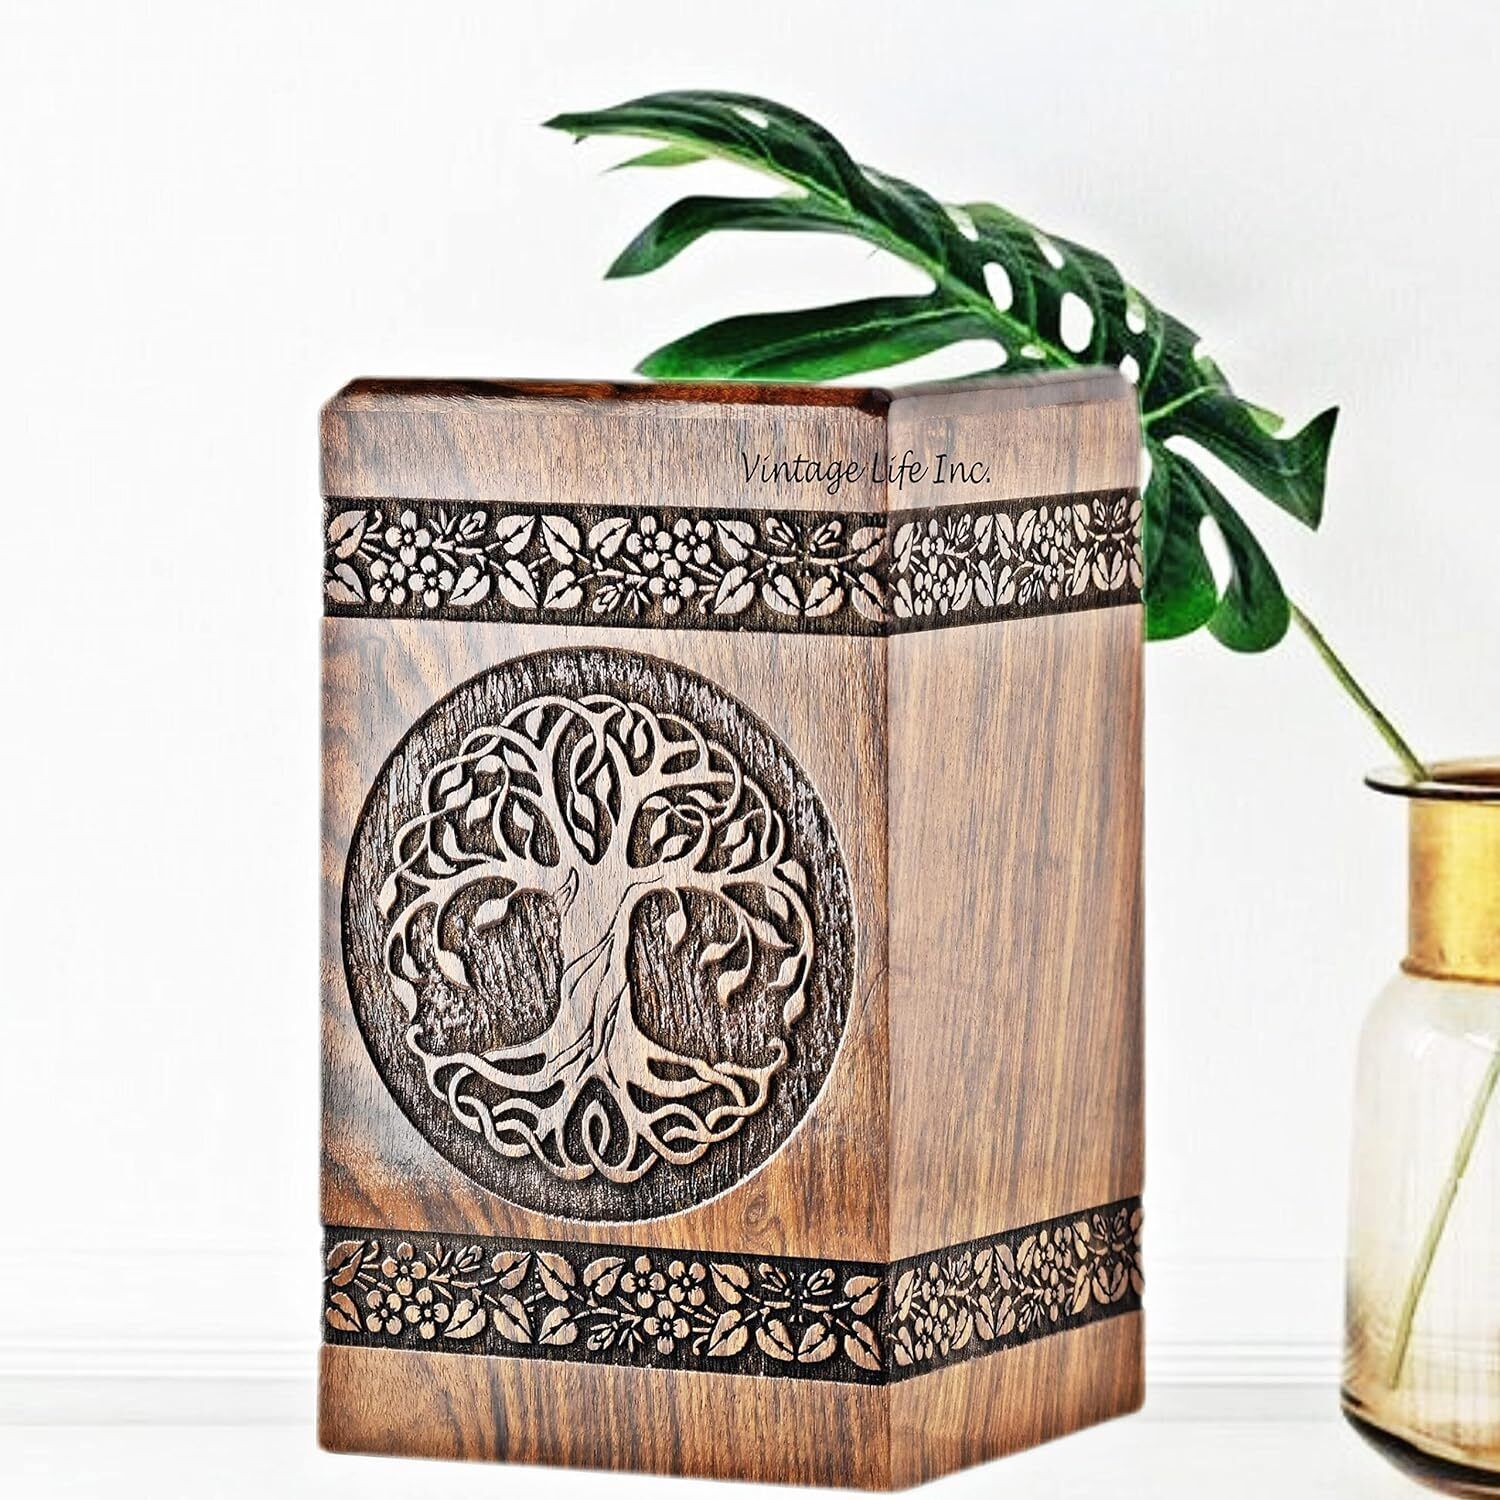 Biodegradable Hand carved Wooden Cremation Urns for Human Ashes Adults & Pets.